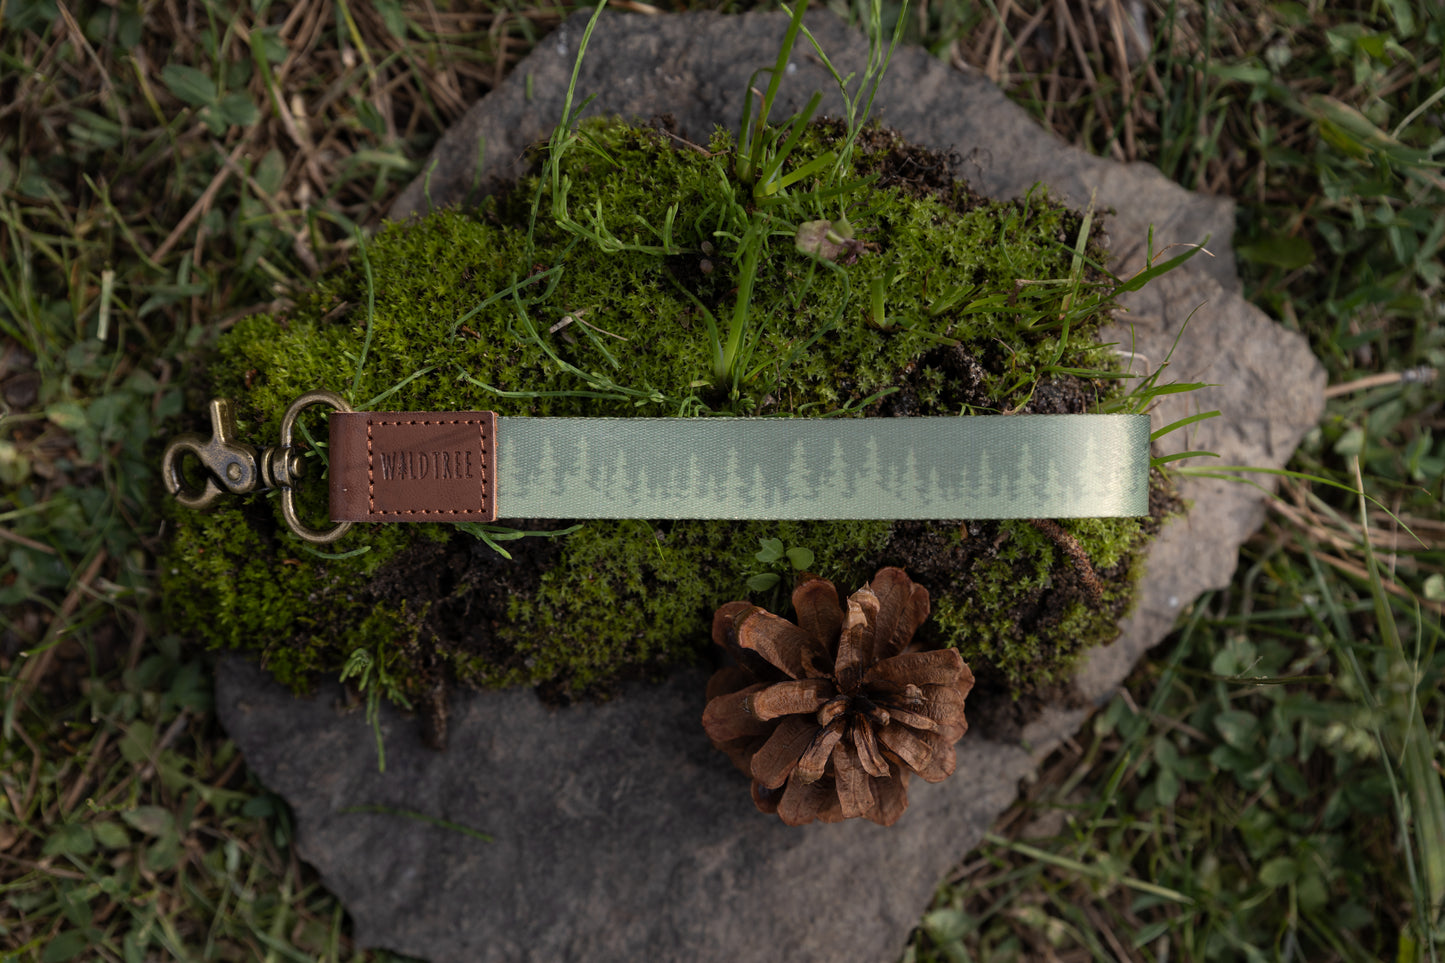 Green pinetree wristlet keychain laying on moss and rock